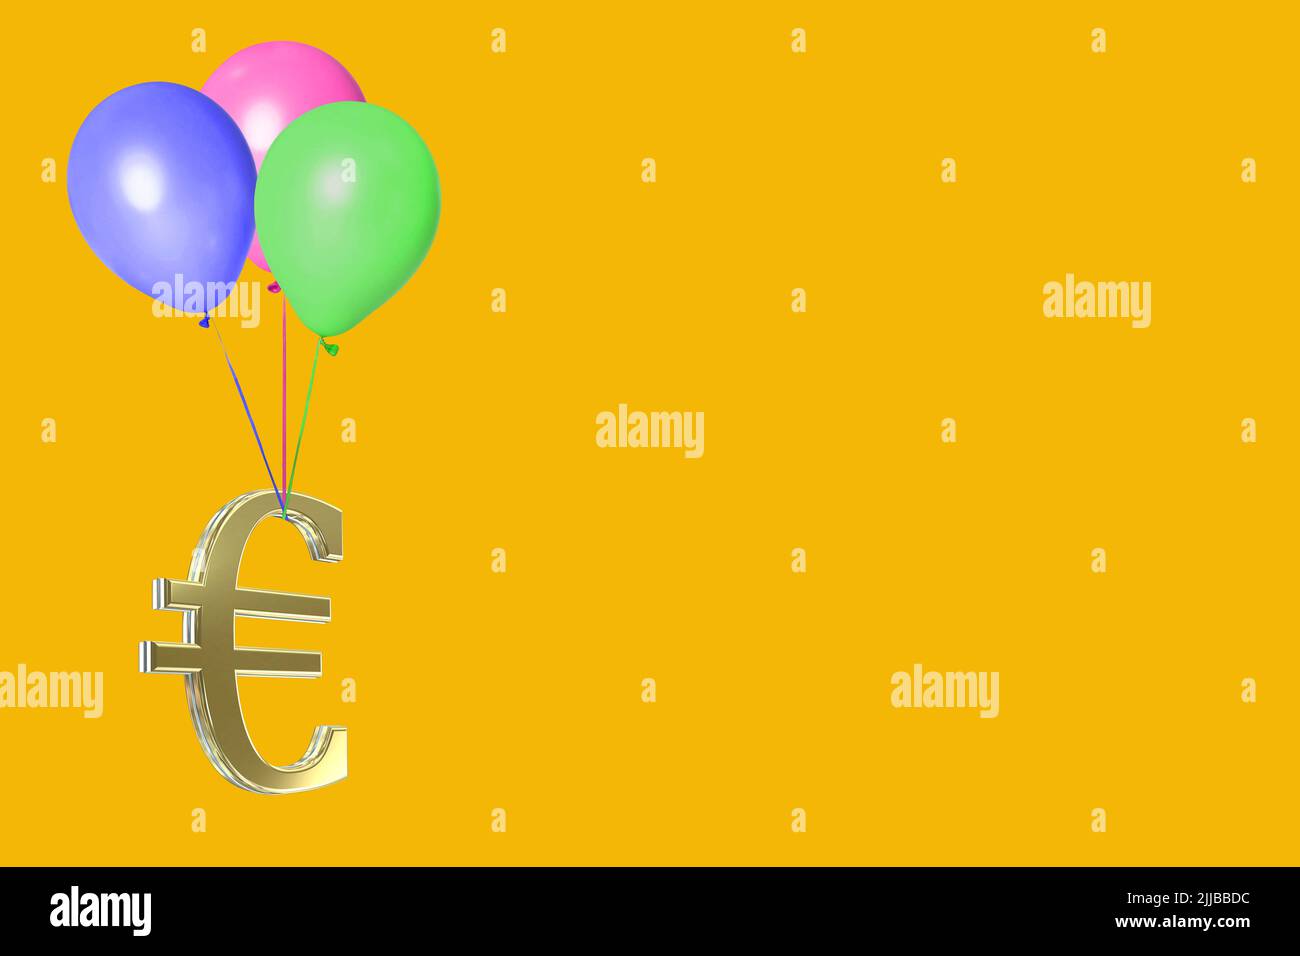 3D gold euro currency symbol symbols sign signs isolated on colorful colourful yellow background euro inflation concept Stock Photo